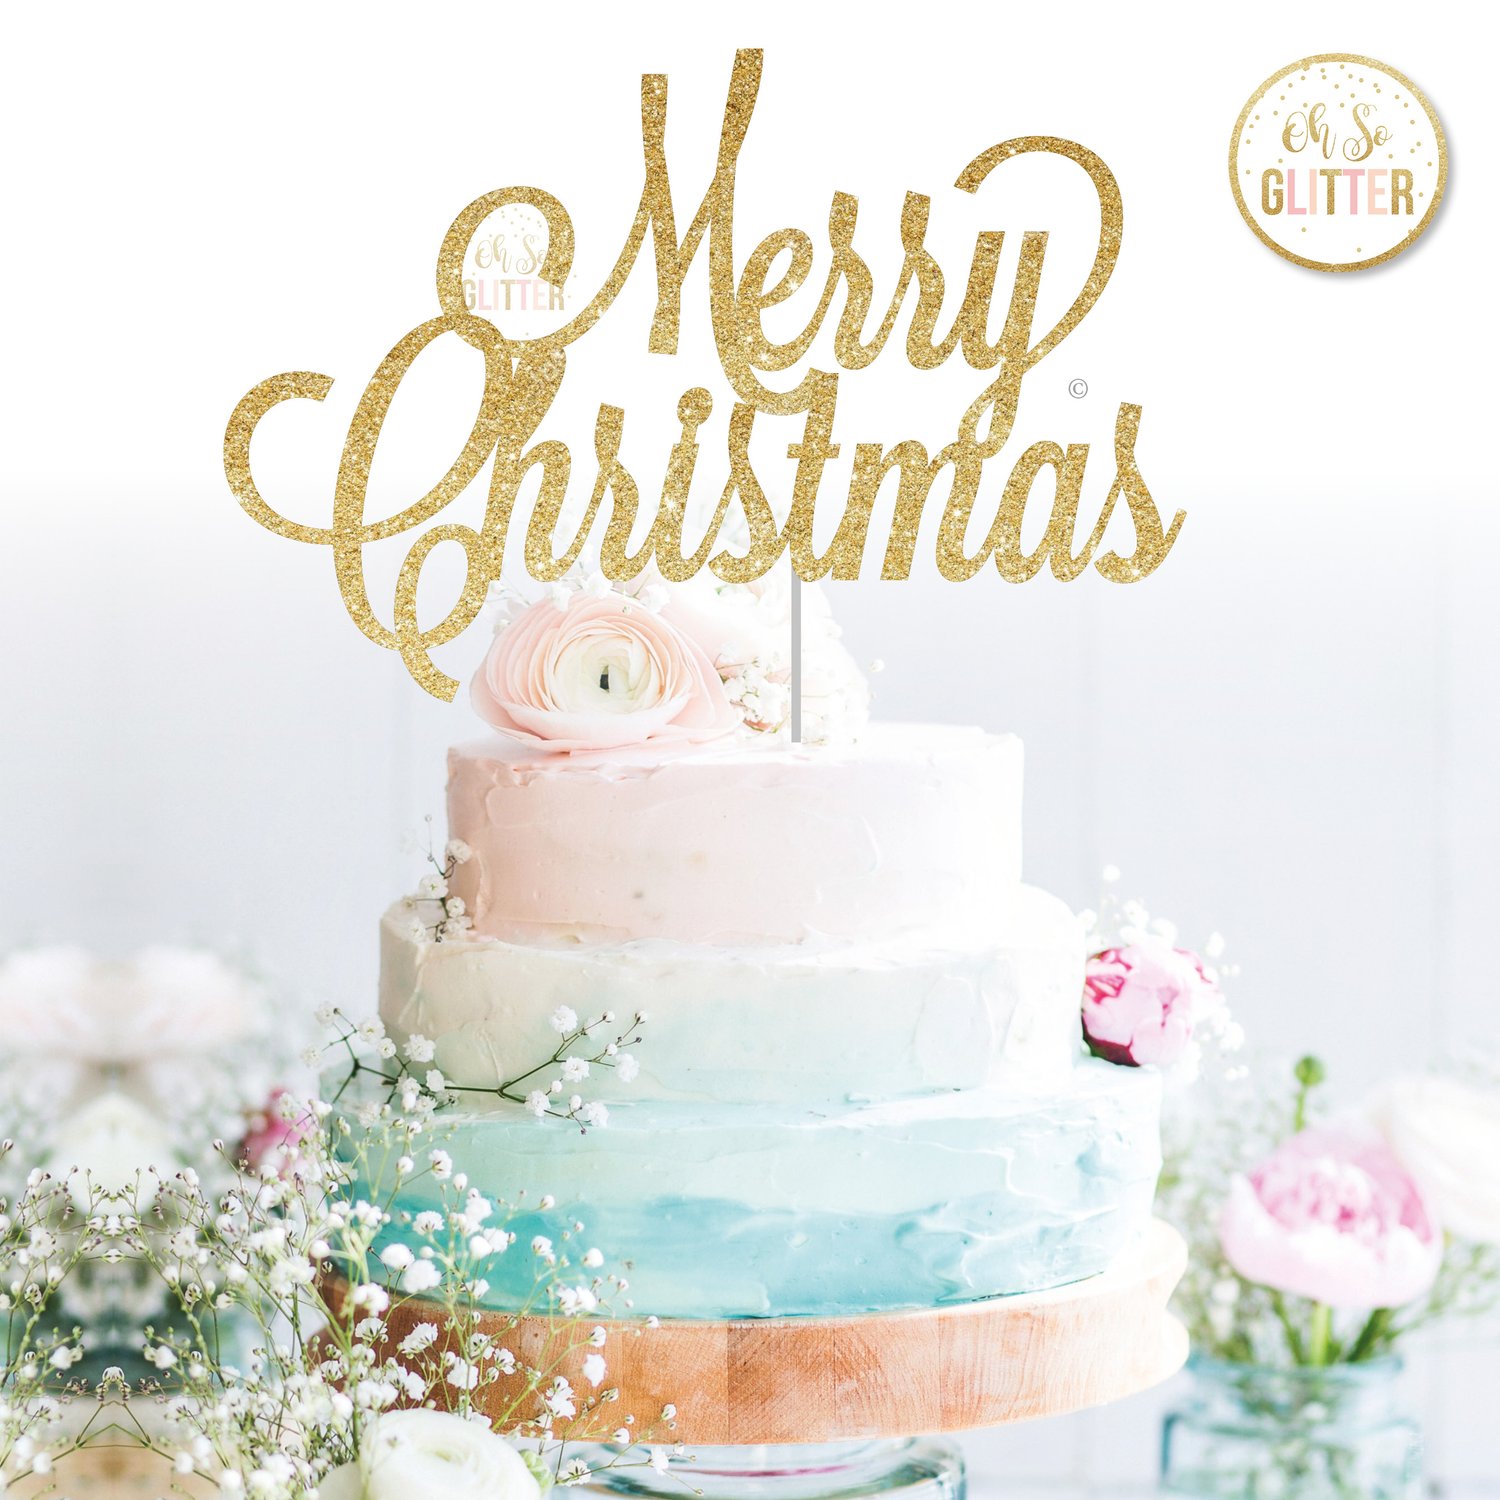 WIN ‘OH SO GLITTER’ CHRISTMAS CAKE TOPPERS